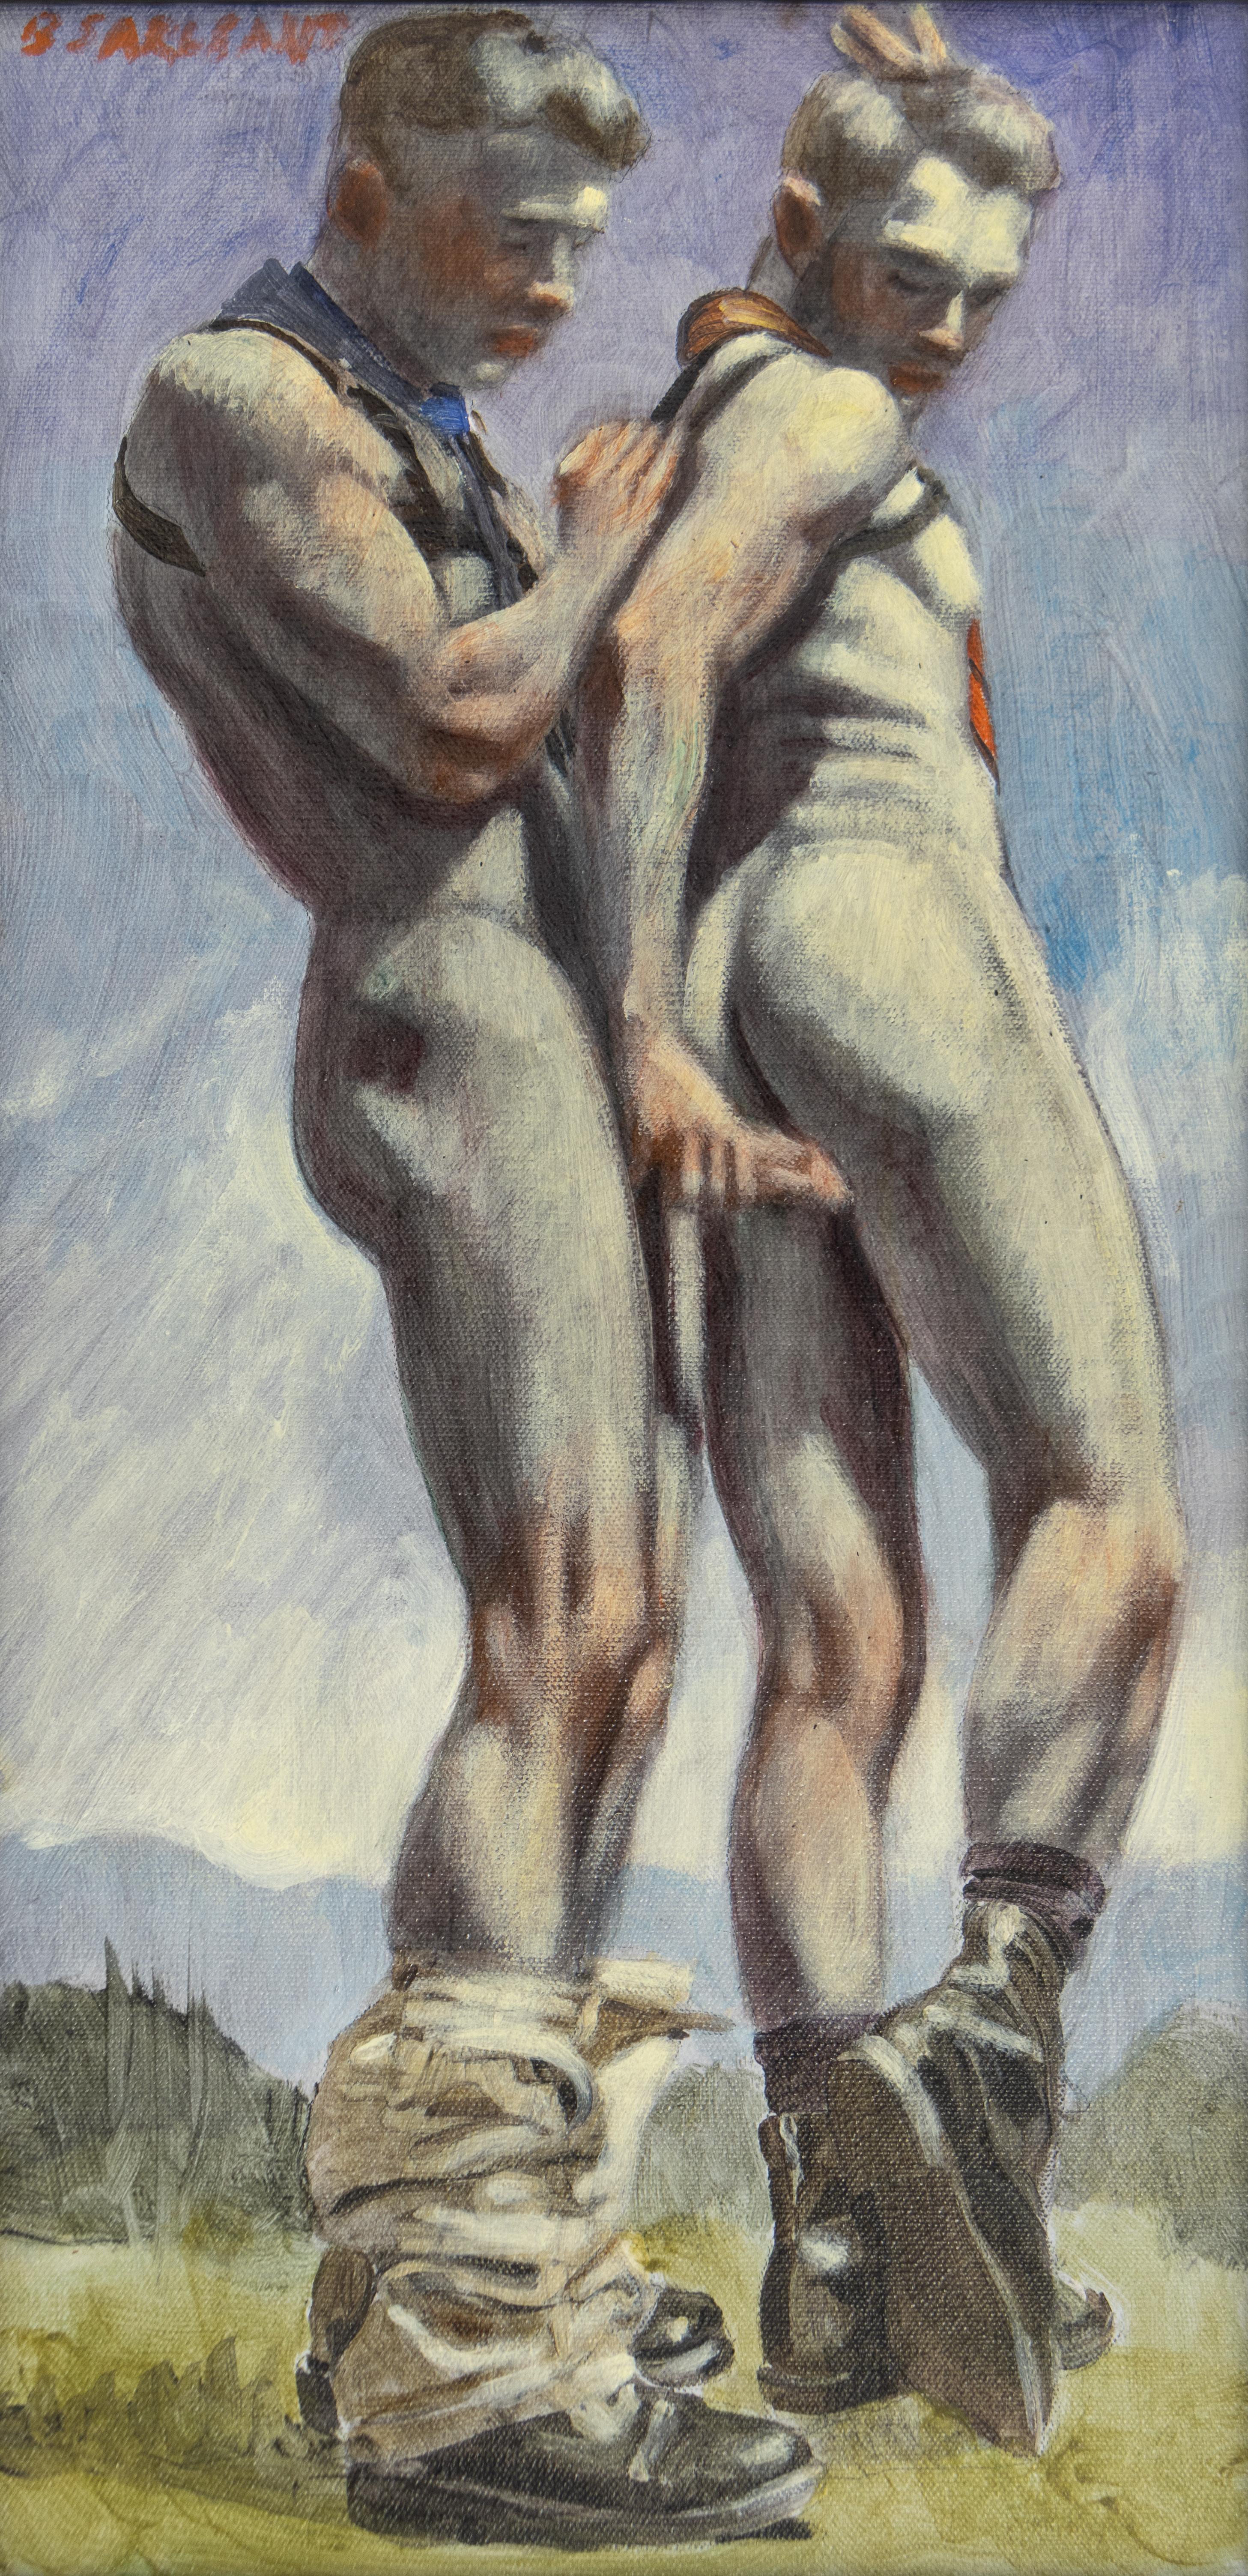 This painting by Mark Beard is offered by CLAMP in New York City.

[Bruce Sargeant (1898-1938)] One Man Behind Another
n.d.

Signed in red, u.l.

Oil on canvas

24 x 12 inches (61 x 30.5 cm)